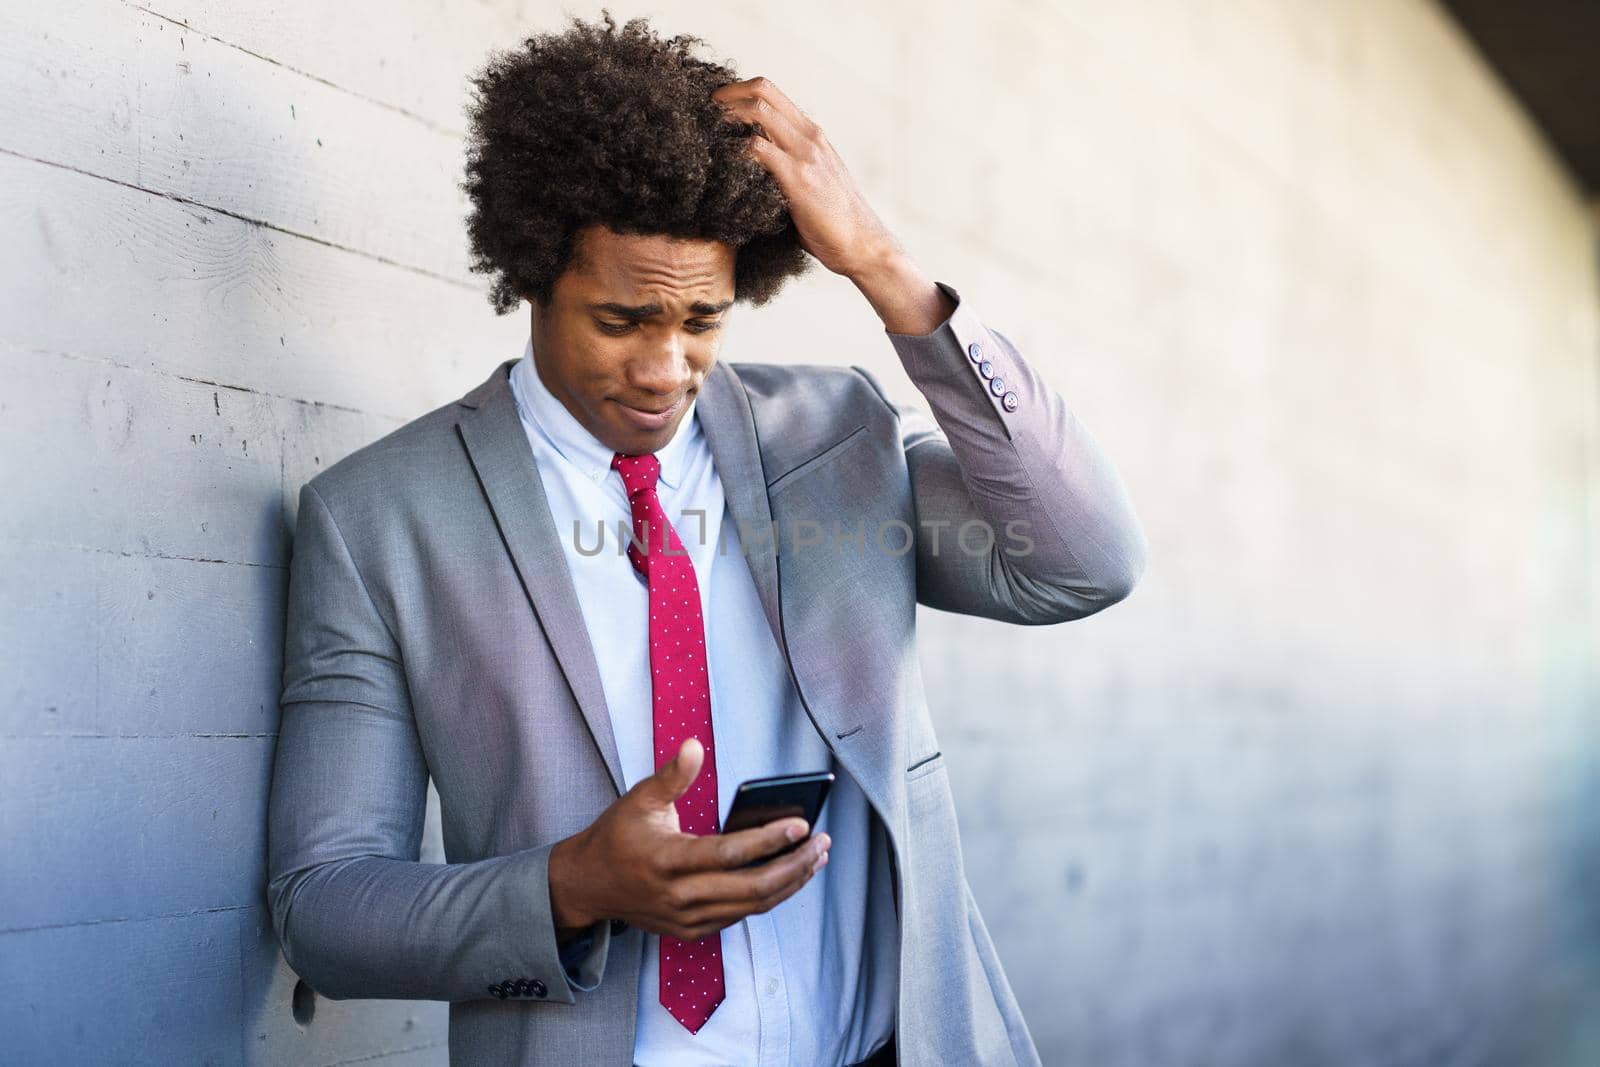 Worried Black Businessman using his smartphone near an office building. Man with afro hair.